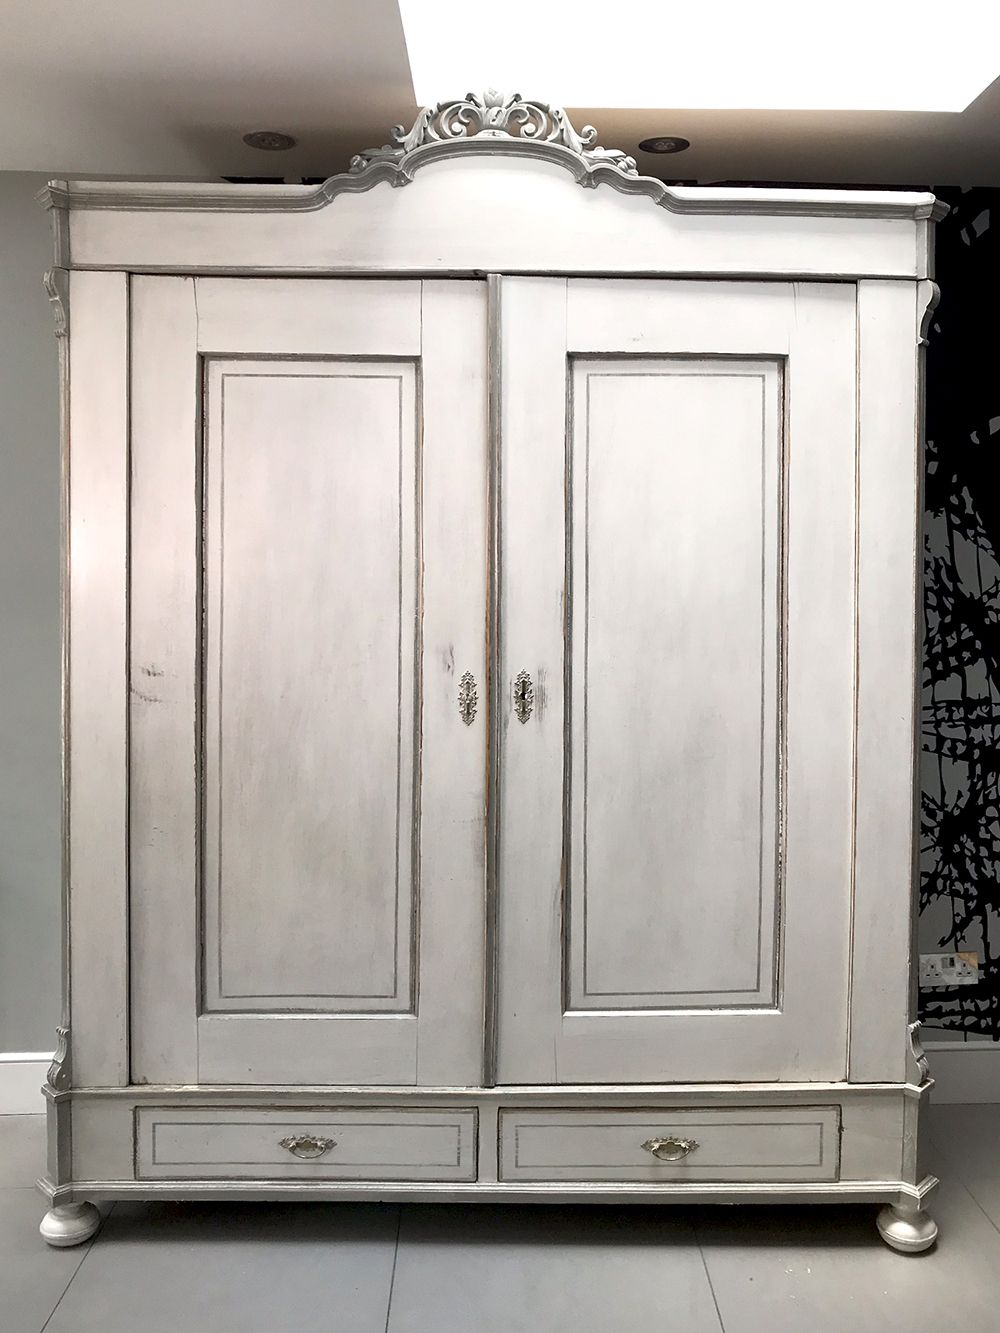 Antique French Painted Armoire – Sold | Napoleonrockefeller – Vintage And  Retro Furniture, Bespoke Hand Crafted Chairs And Seating Pertaining To French Armoire Wardrobes (Photo 11 of 15)